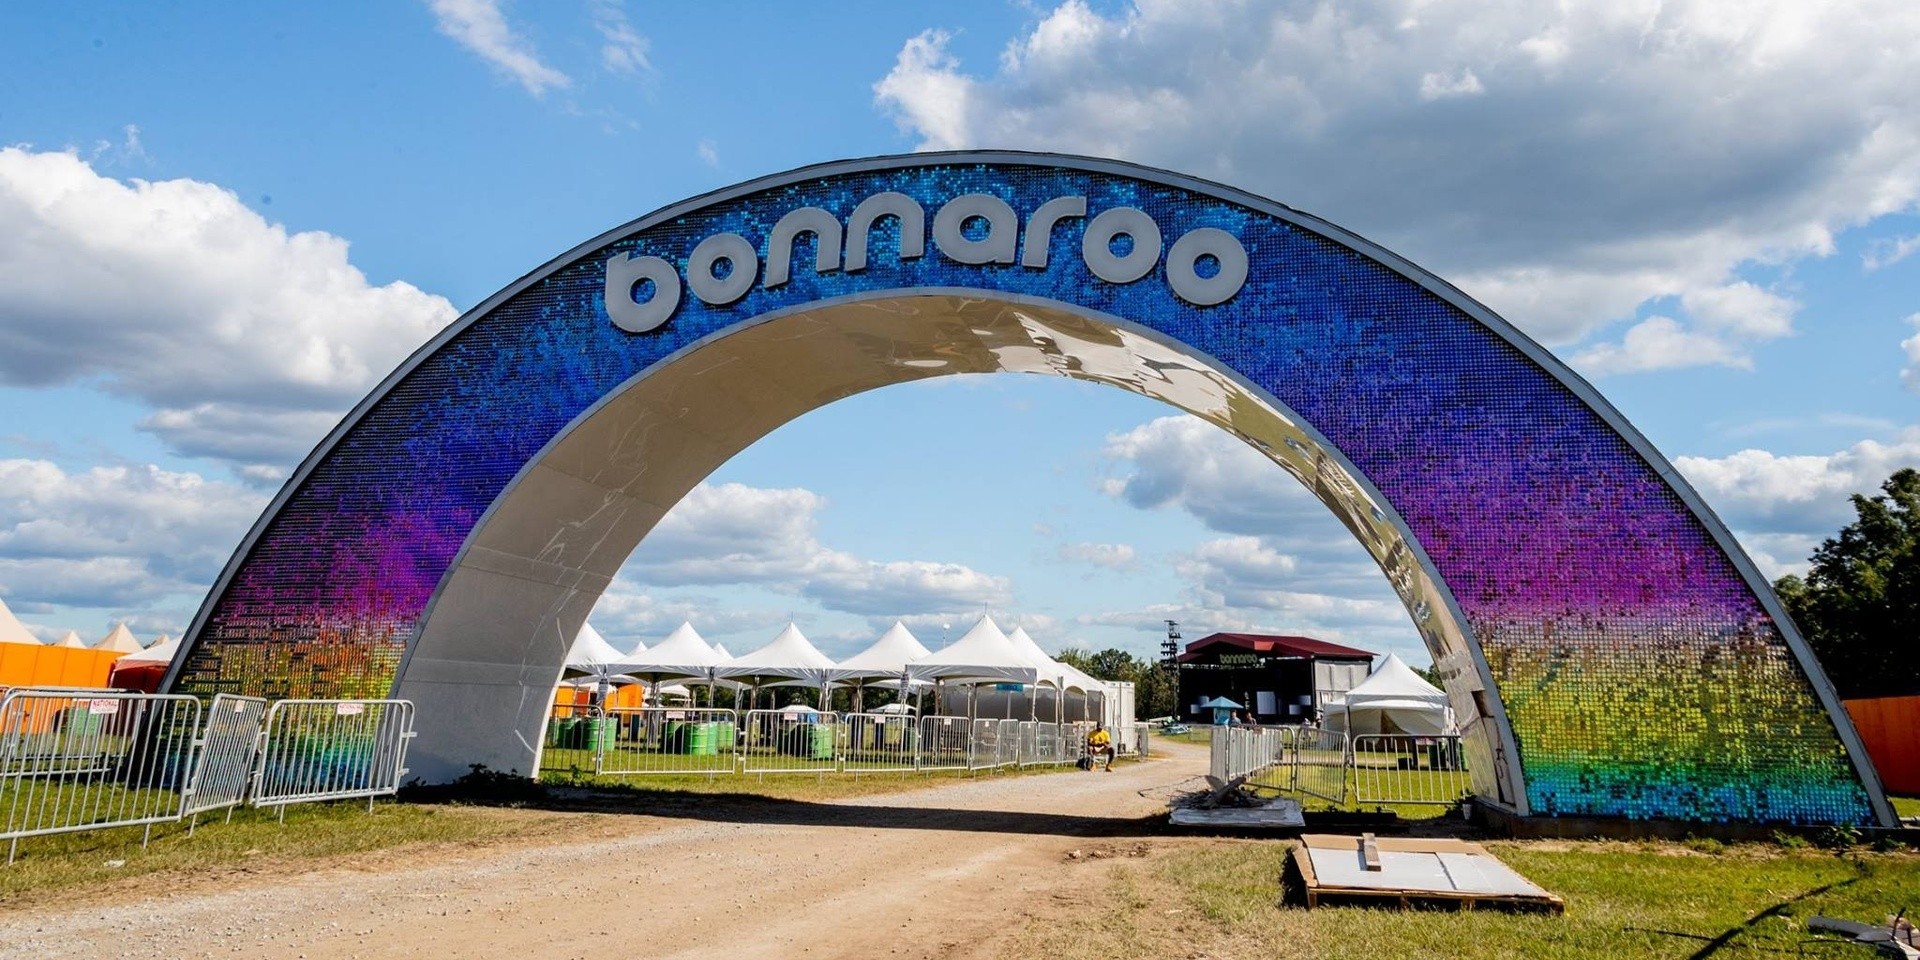 Free laundry service at a music festival? Bonnaroo has a stroke of genius